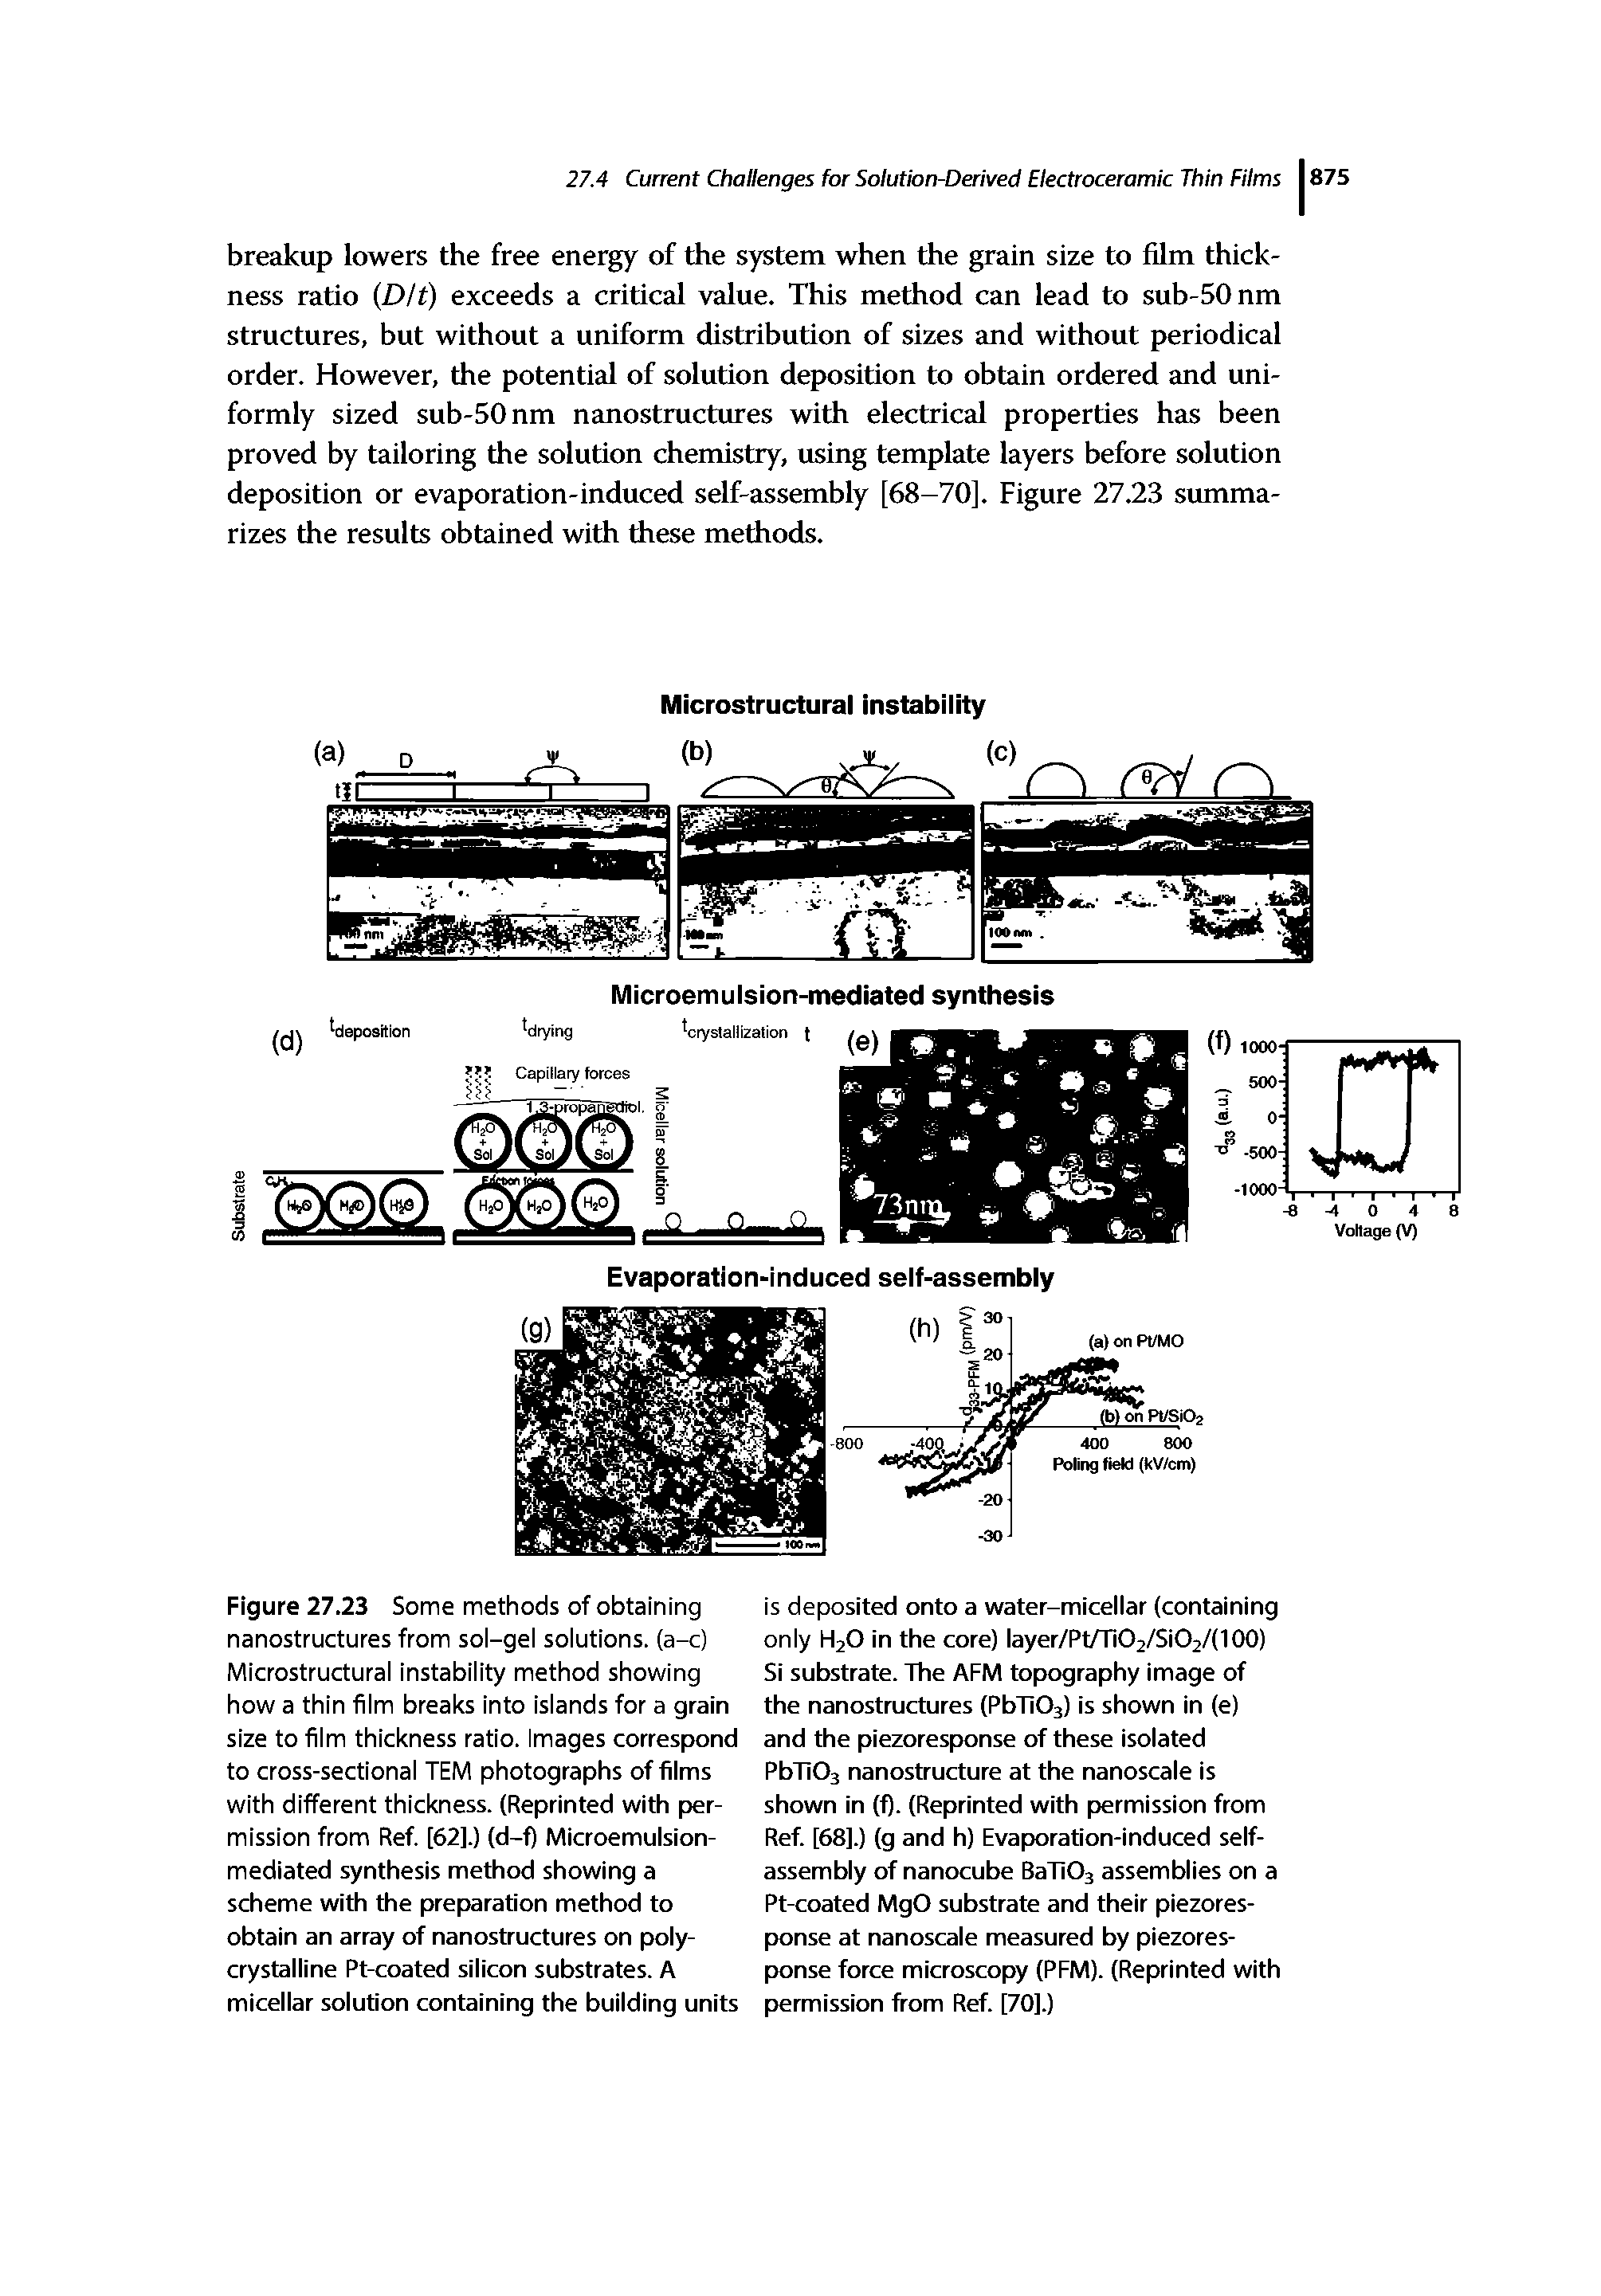 Figure 27.23 Some methods of obtaining nanostructures from sol-gel solutions, (a-c) Microstructural instability method showing how a thin film breaks into islands for a grain size to film thickness ratio. Images correspond to cross-sectional TEM photographs of films with different thickness. (Reprinted with permission from Ref. [62].) (d-f) Microemulsion-mediated synthesis method showing a scheme with the preparation method to obtain an array of nanostructures on polycrystalline Pt-coated silicon substrates. A micellar solution containing the building units...